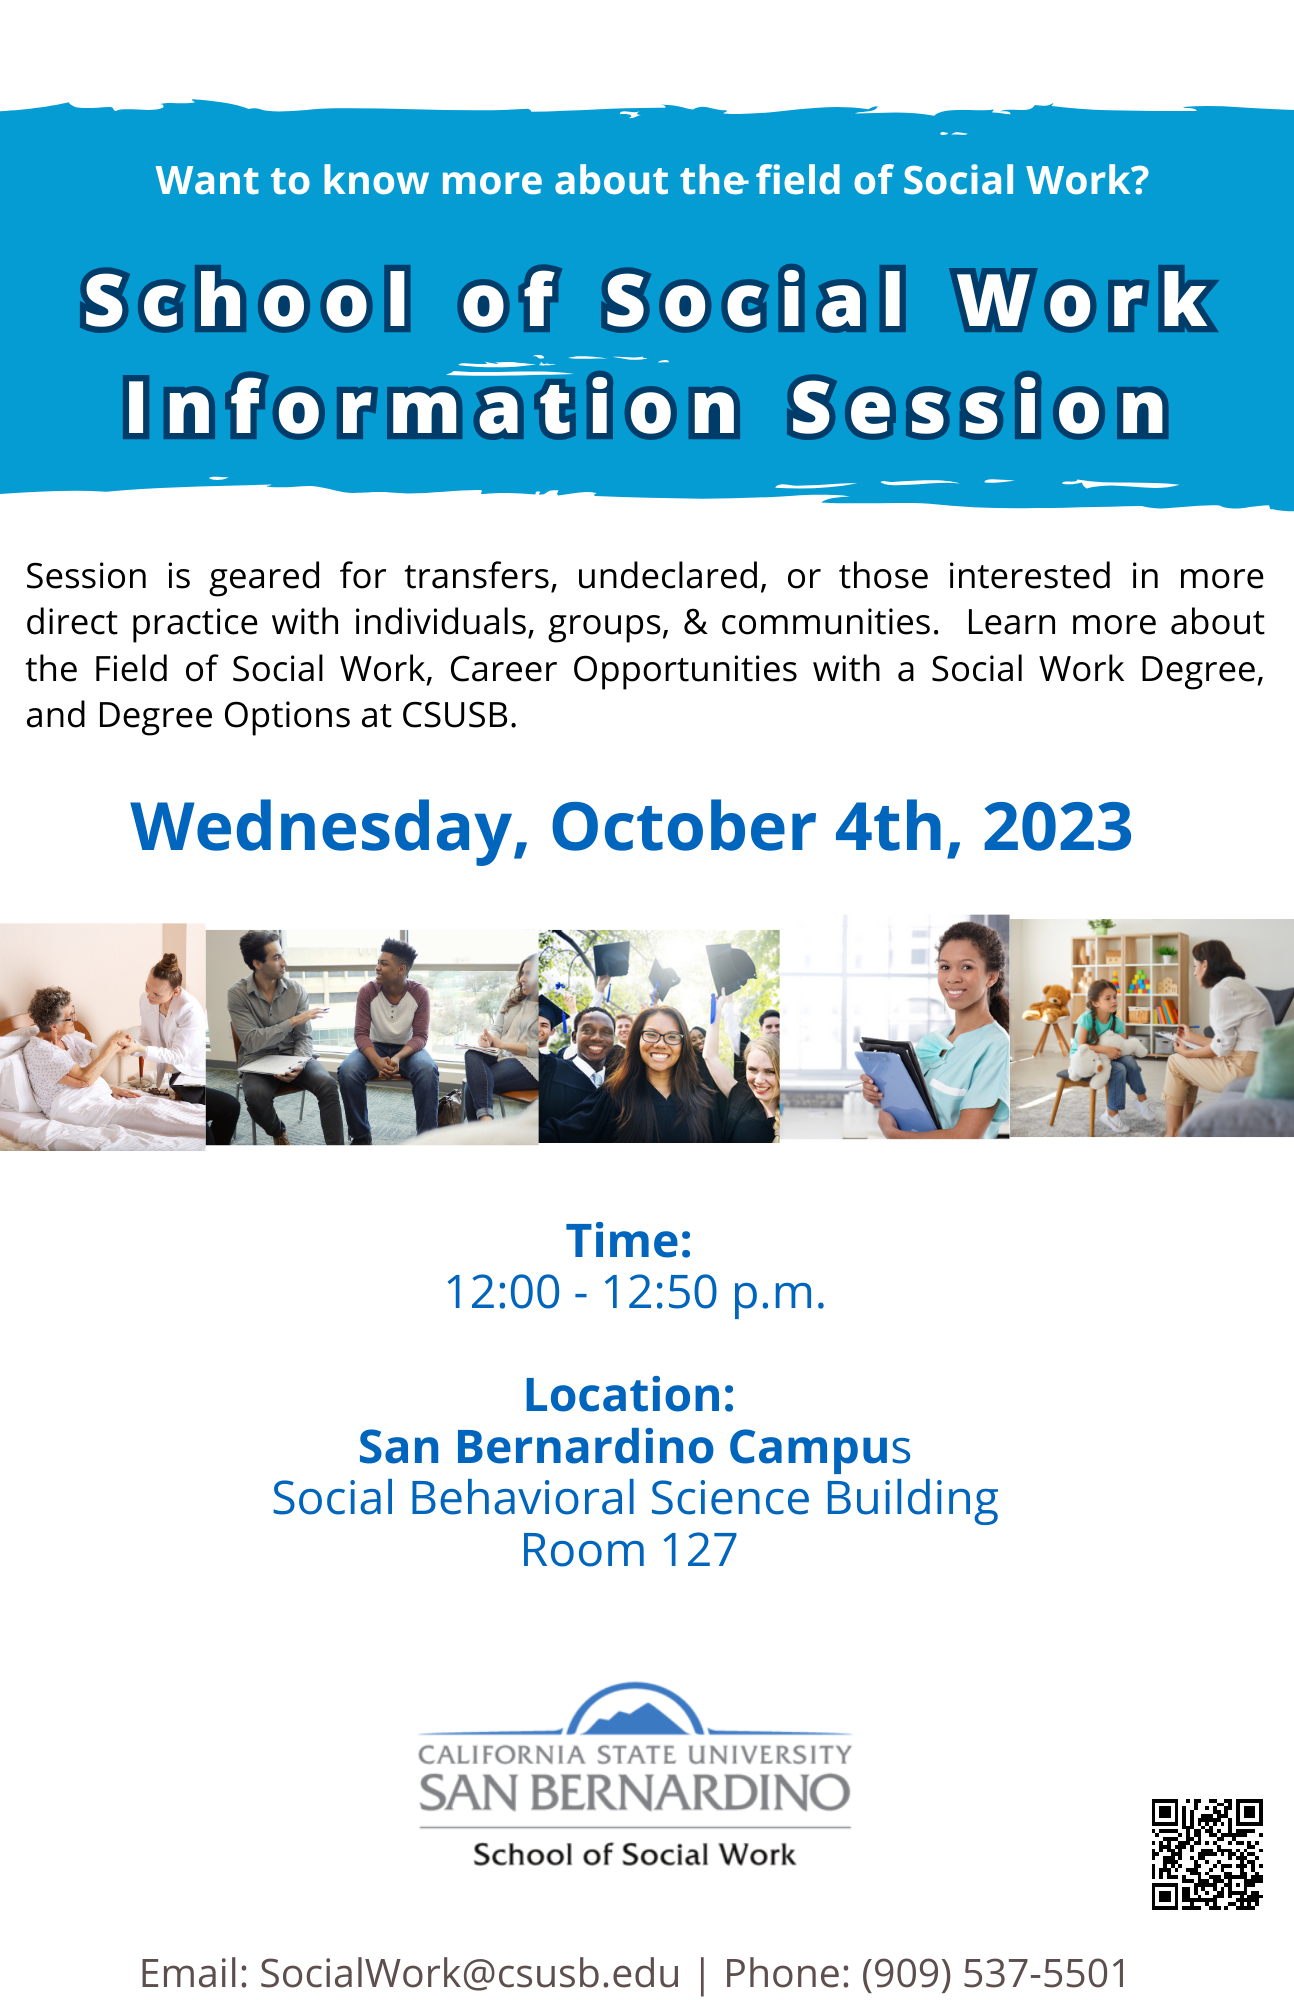 Session is geared for transfers, undeclared, or those interested in more direct practice with individuals, groups, & communities.  Learn more about the Field of Social Work, Career Opportunities with a Social Work Degree, and Degree Options at CSUSB.  